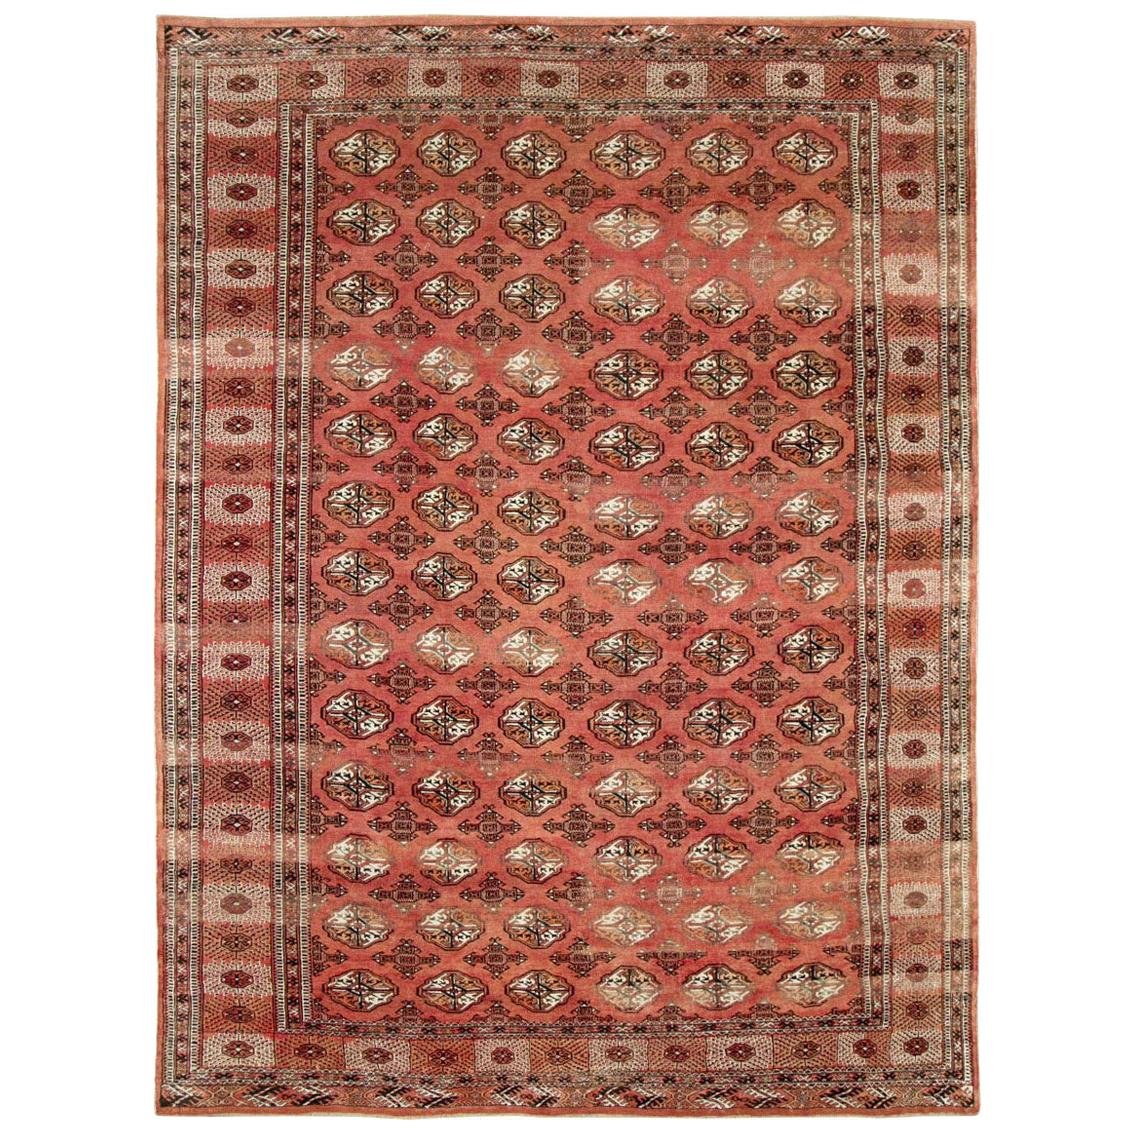 Tribal Mid-20th Century Handmade Central Asian Turkoman Large Room Size Carpet For Sale